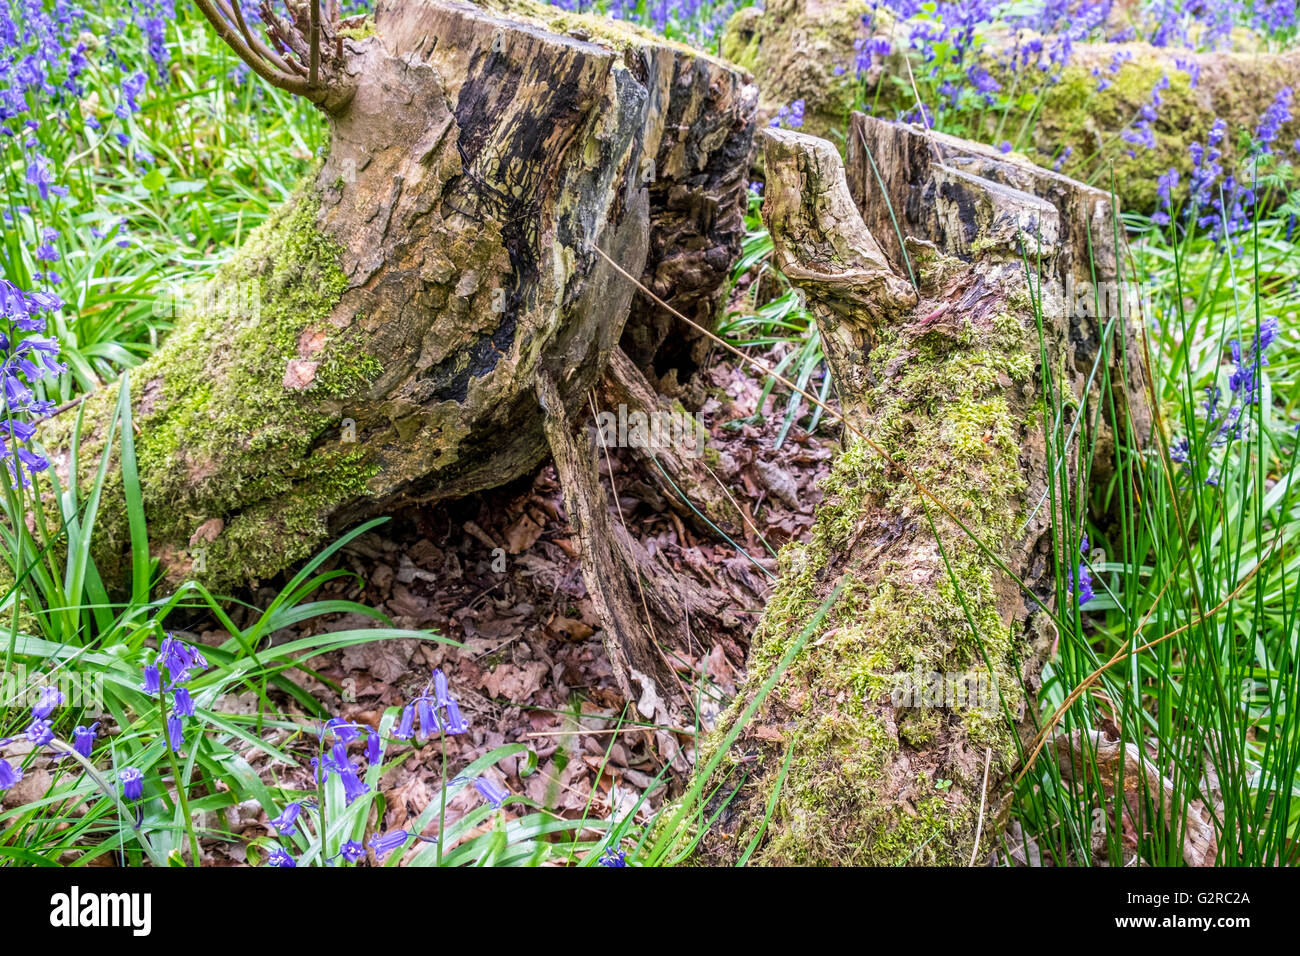 Wild Blue Bells and Wild Garlic in a growing in a field with a decaying tree. Stock Photo